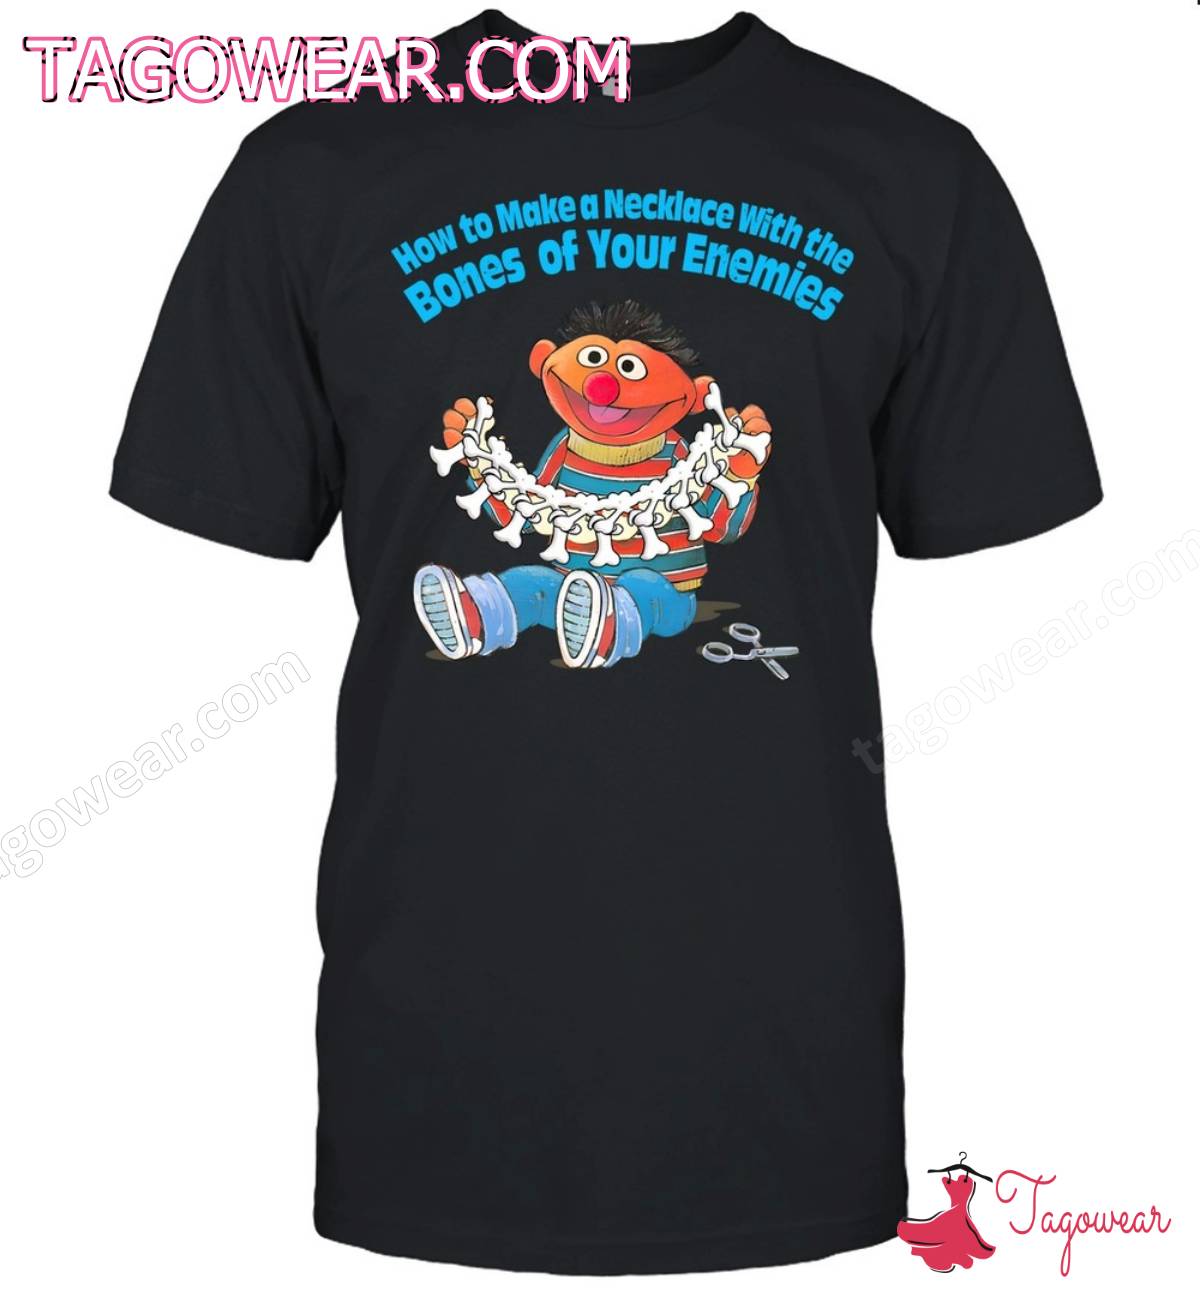 Muppets How To Make Necklace With The Bones Of Your Enemies Shirt